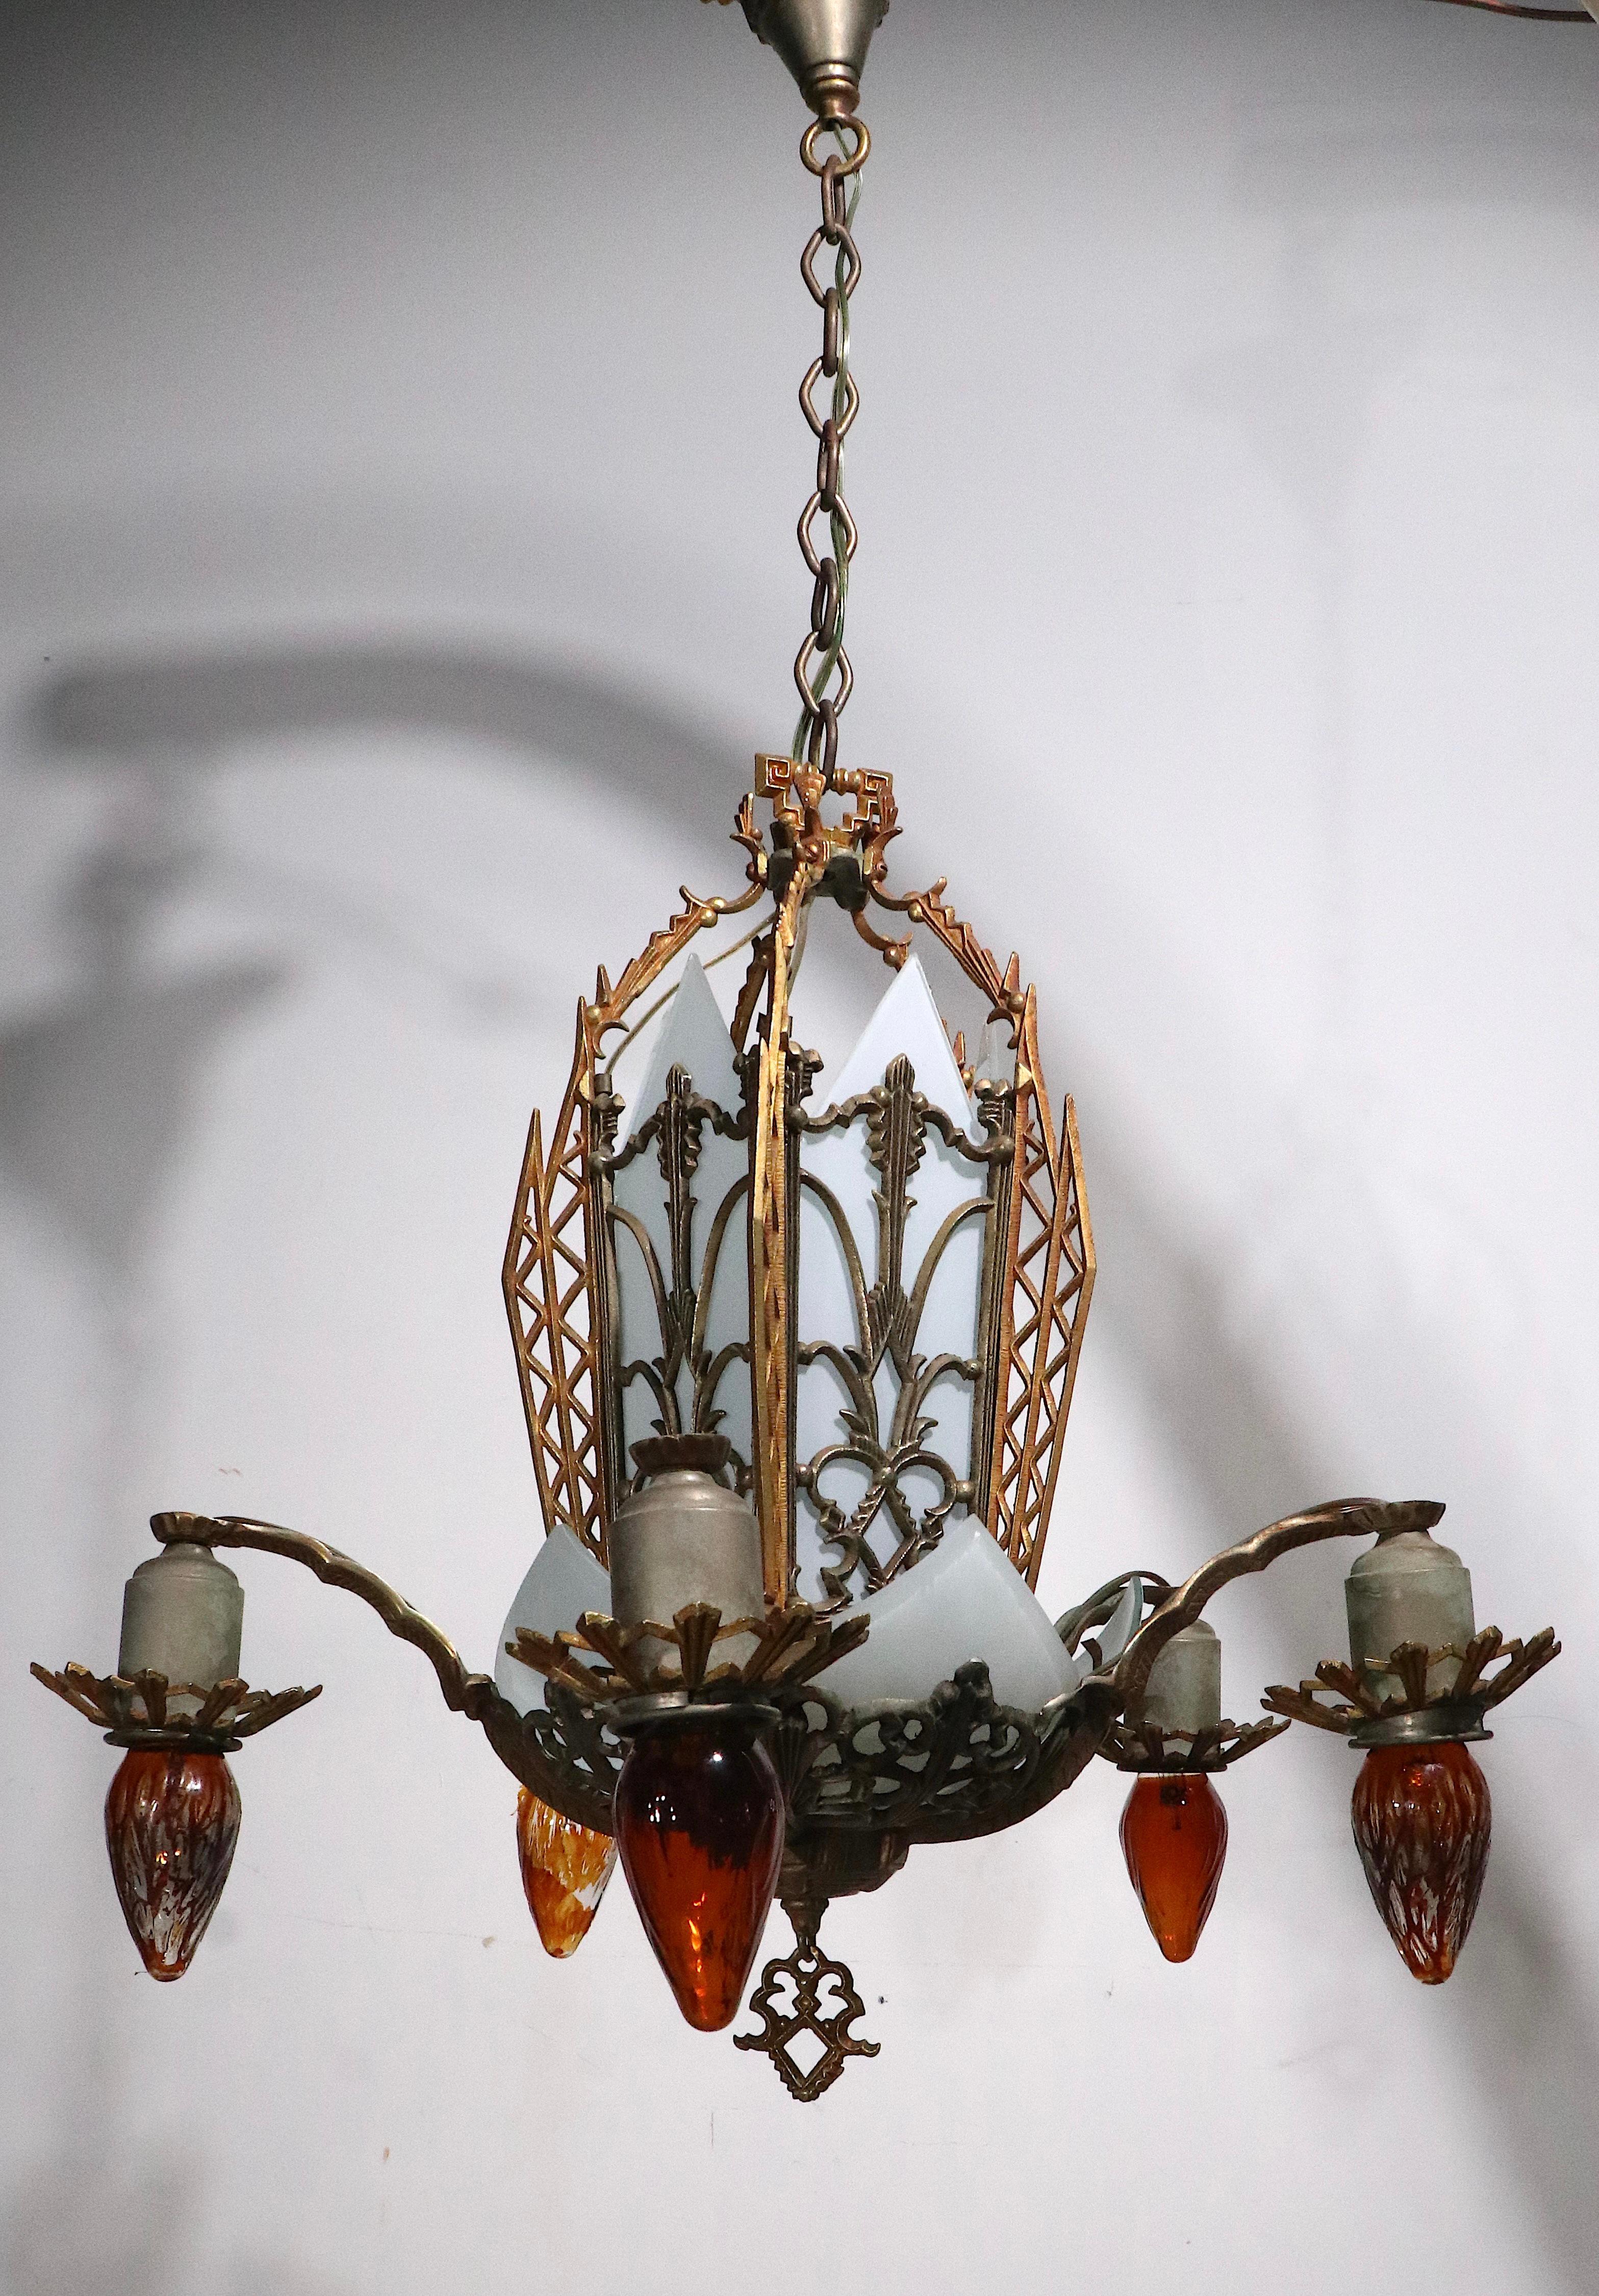 Classic American Art Deco chandelier, having an open work brass frame with original white glass panel shades, curved elements on the bottom, and pointed panels at the top. The fixture has five arms which have down facing exposed bulbs, and a center